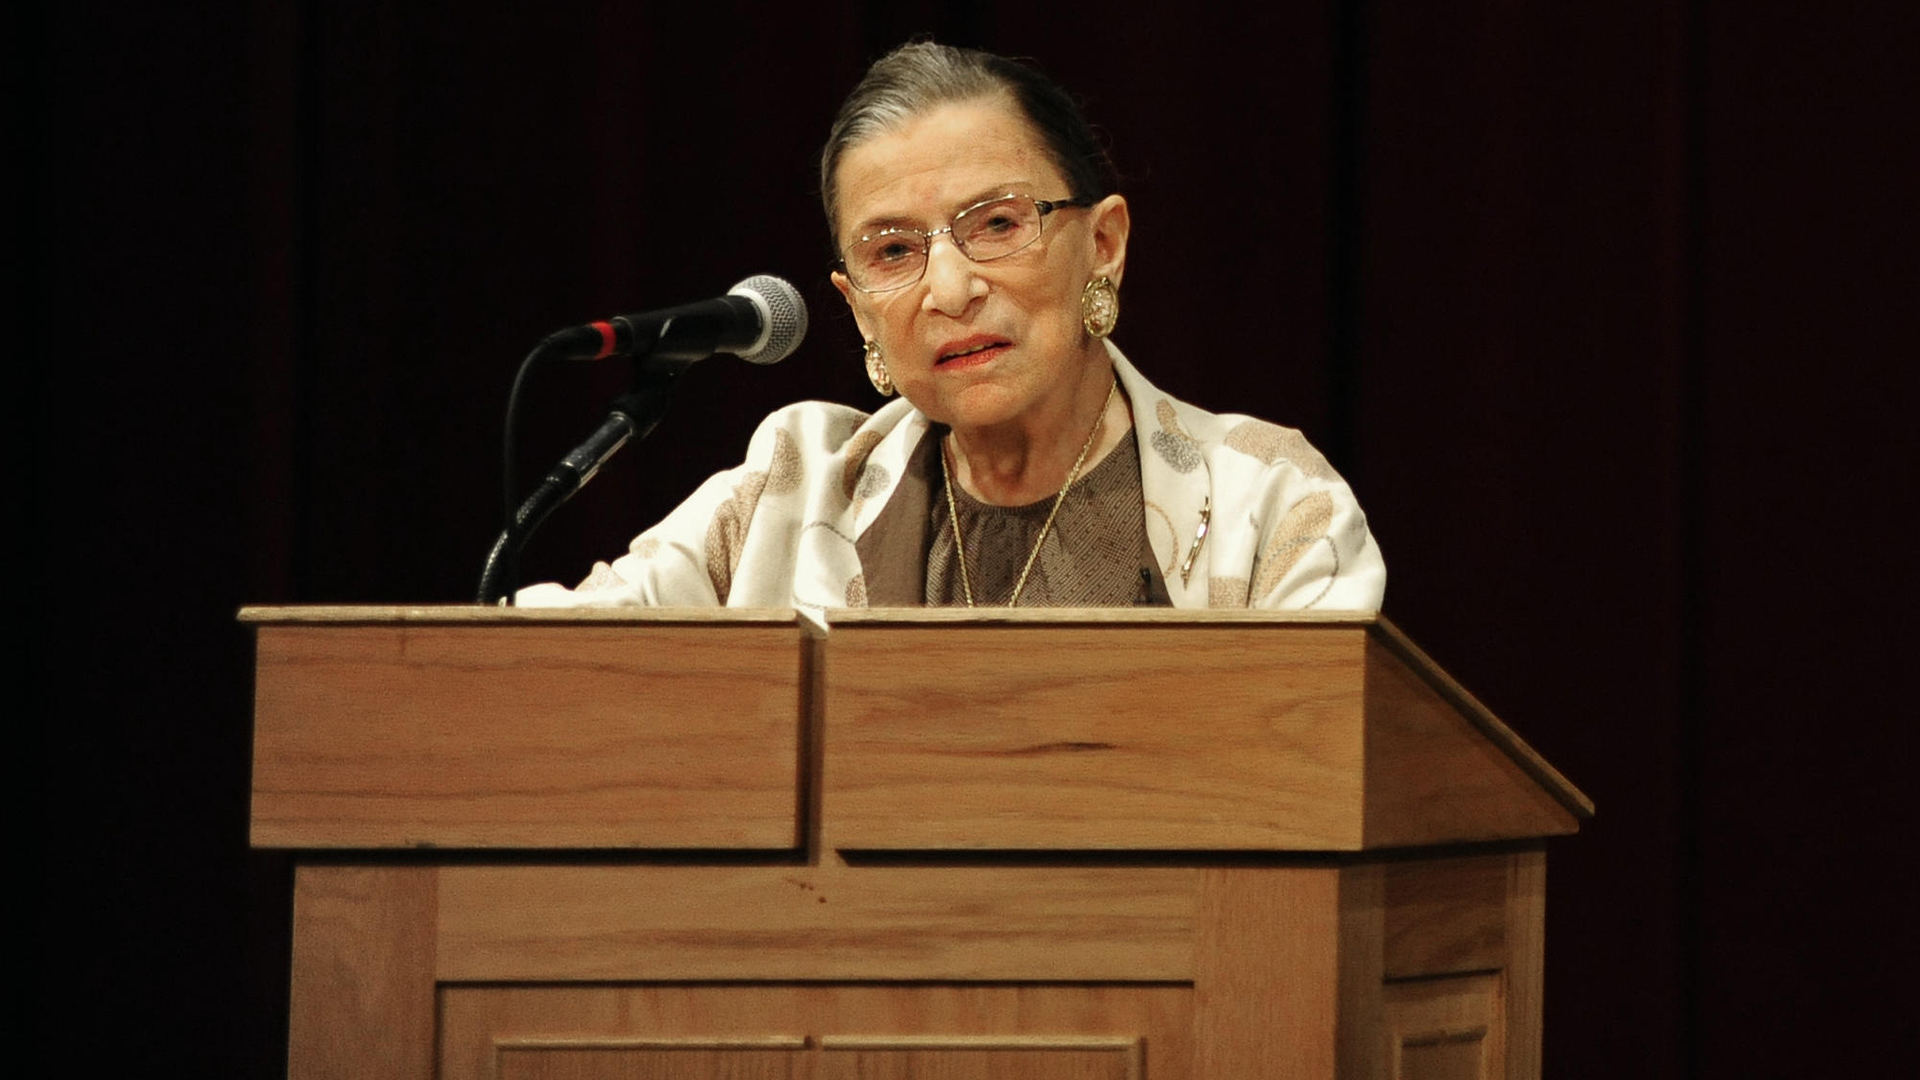 October 4, 1993: Ruth Bader Ginsburg Joined the U.S. Supreme Court